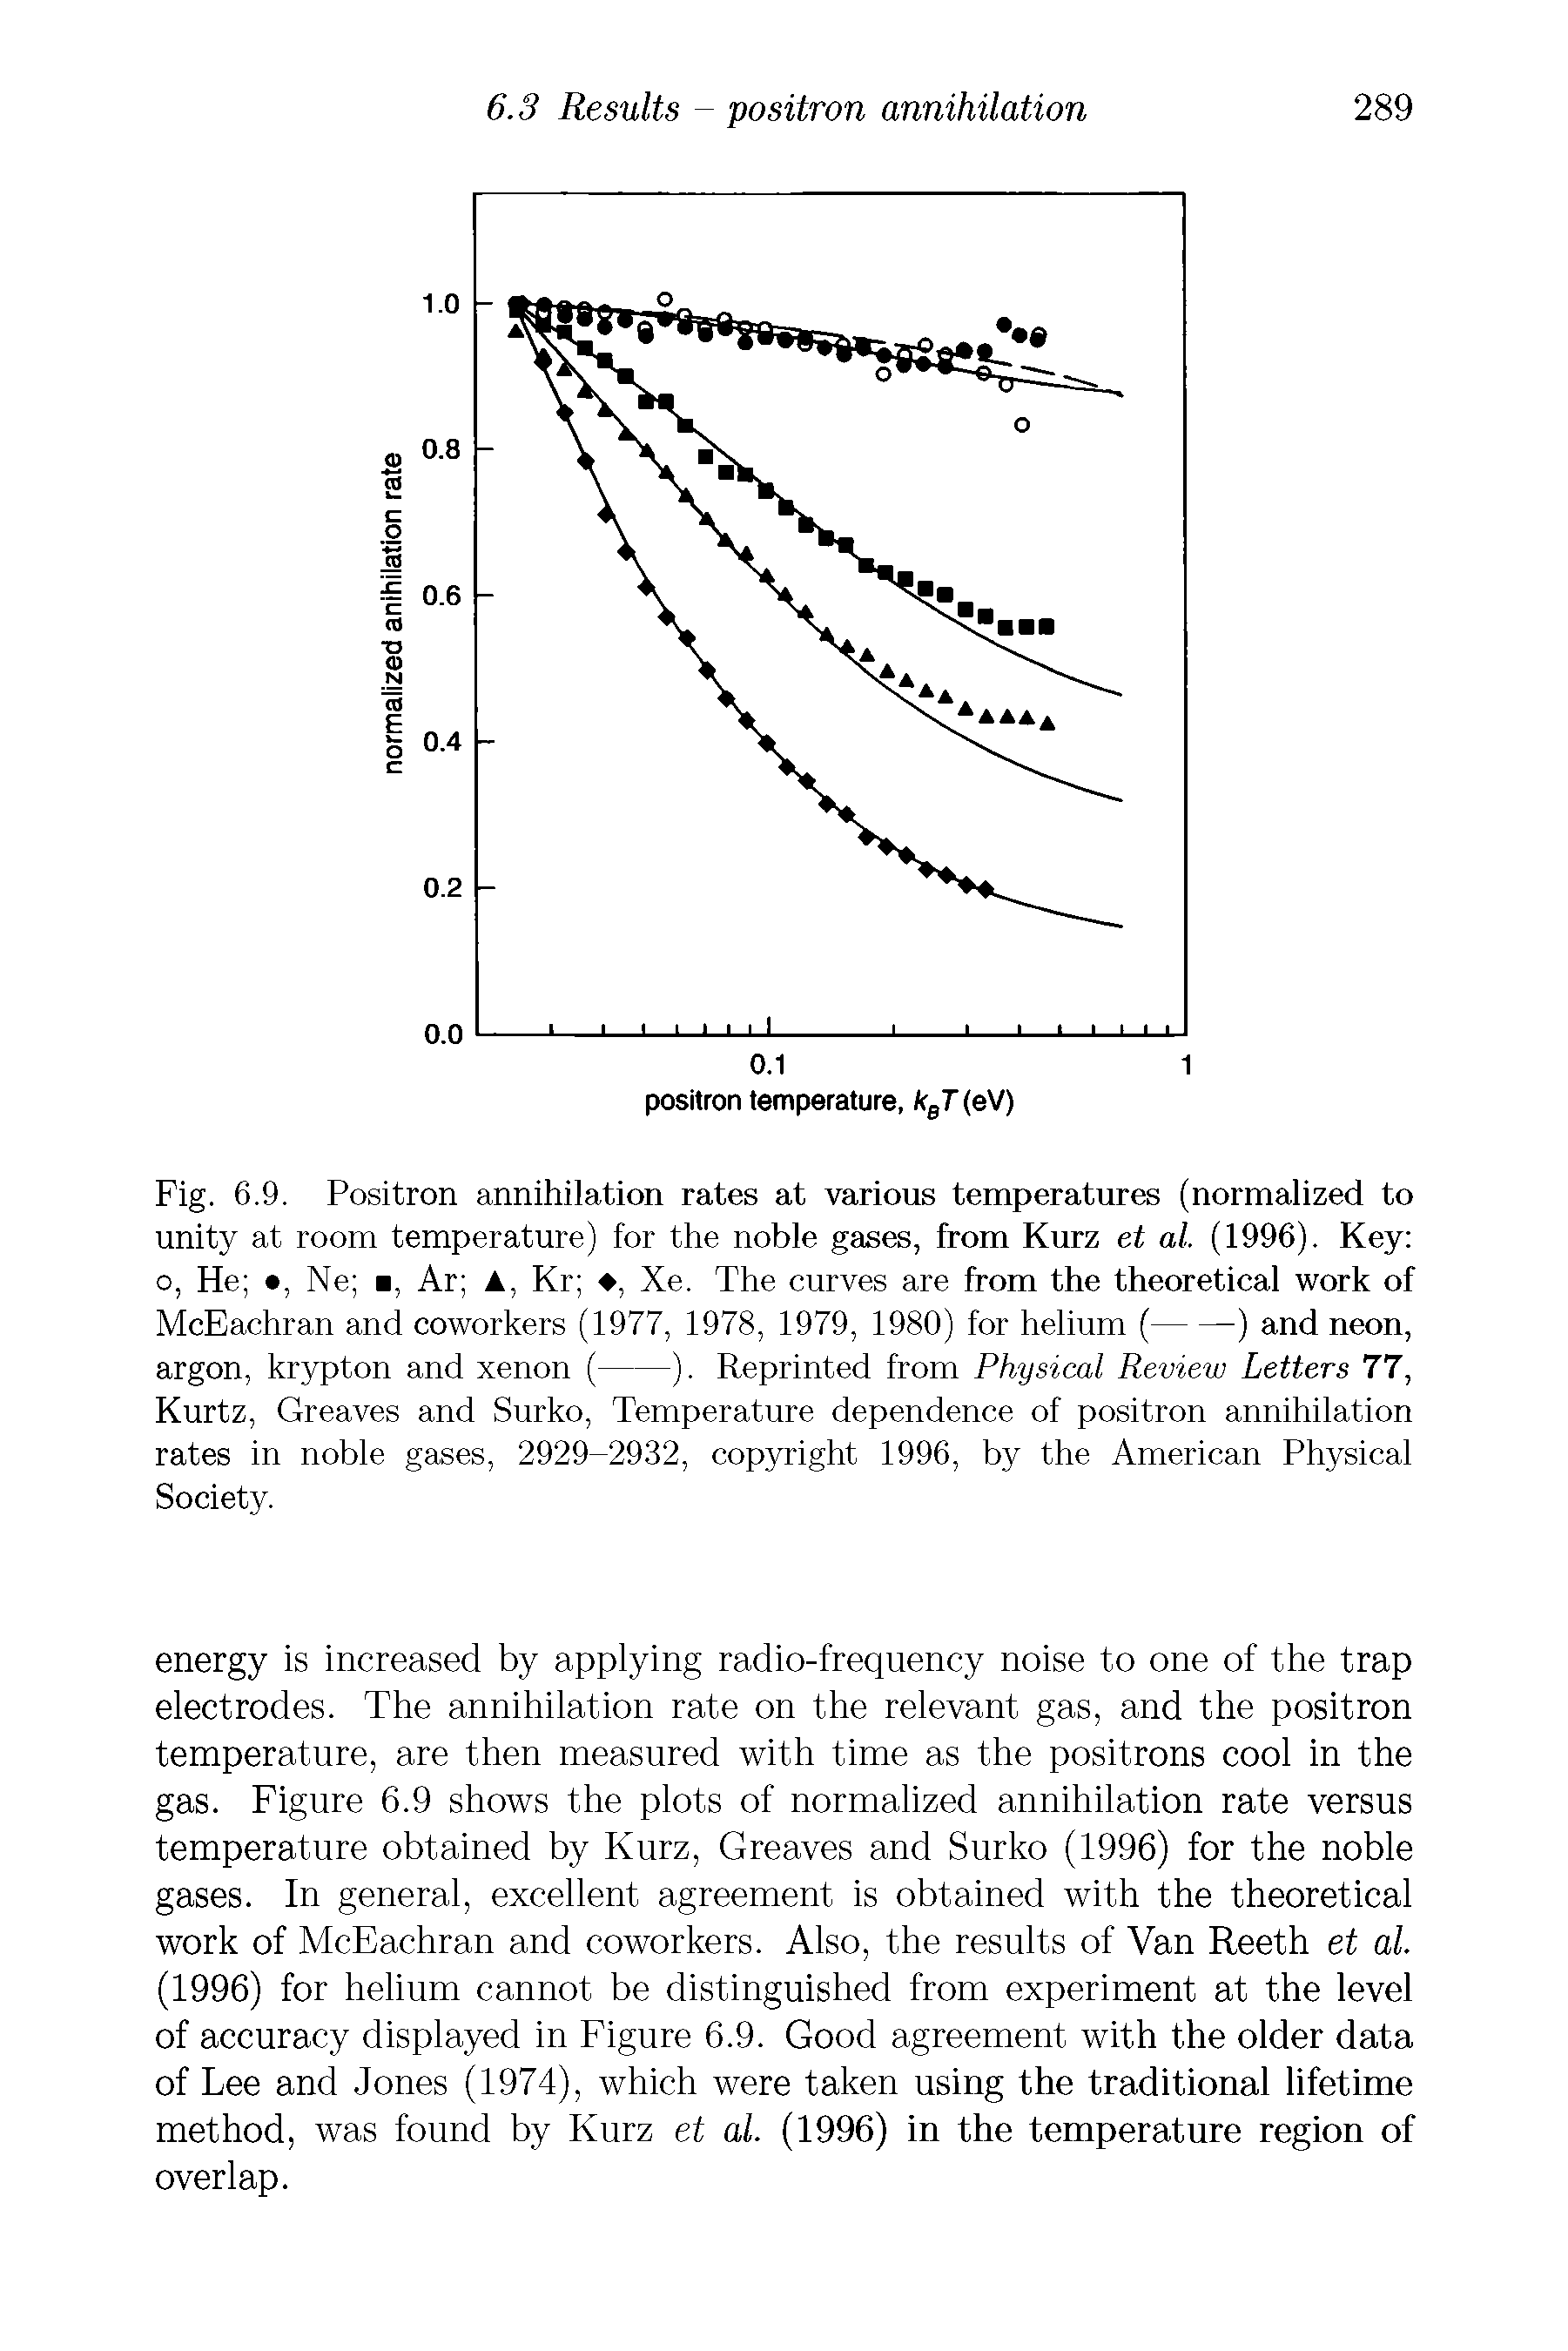 Fig. 6.9. Positron annihilation rates at various temperatures (normalized to unity at room temperature) for the noble gases, from Kurz et al. (1996). Key o, He , Ne . Ar A, Kr , Xe. The curves are from the theoretical work of...